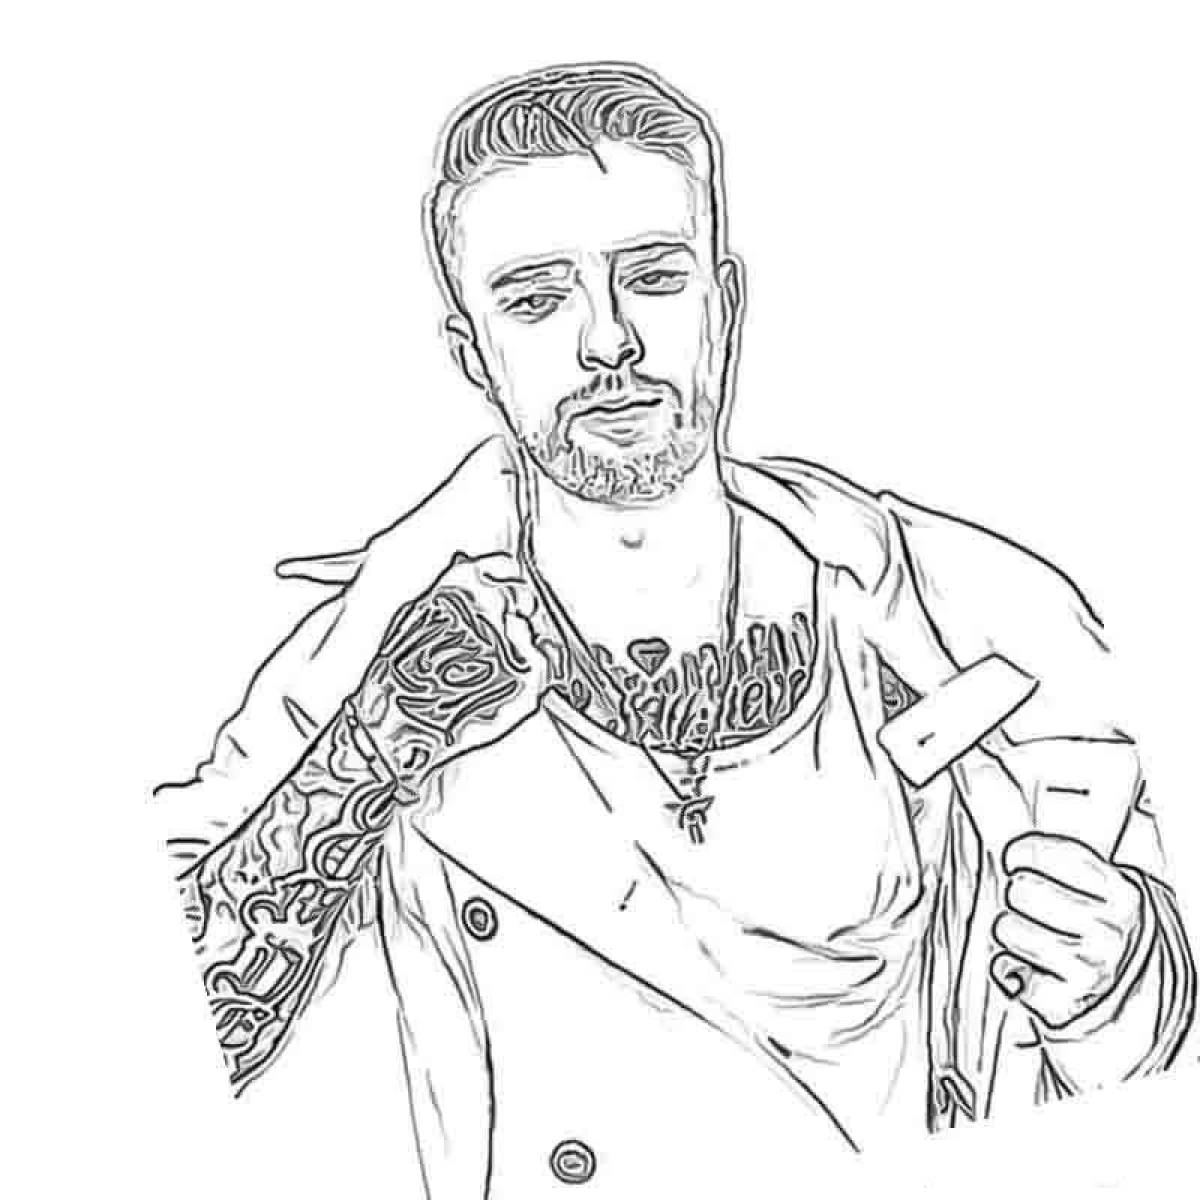 Coloring book charming egor creed